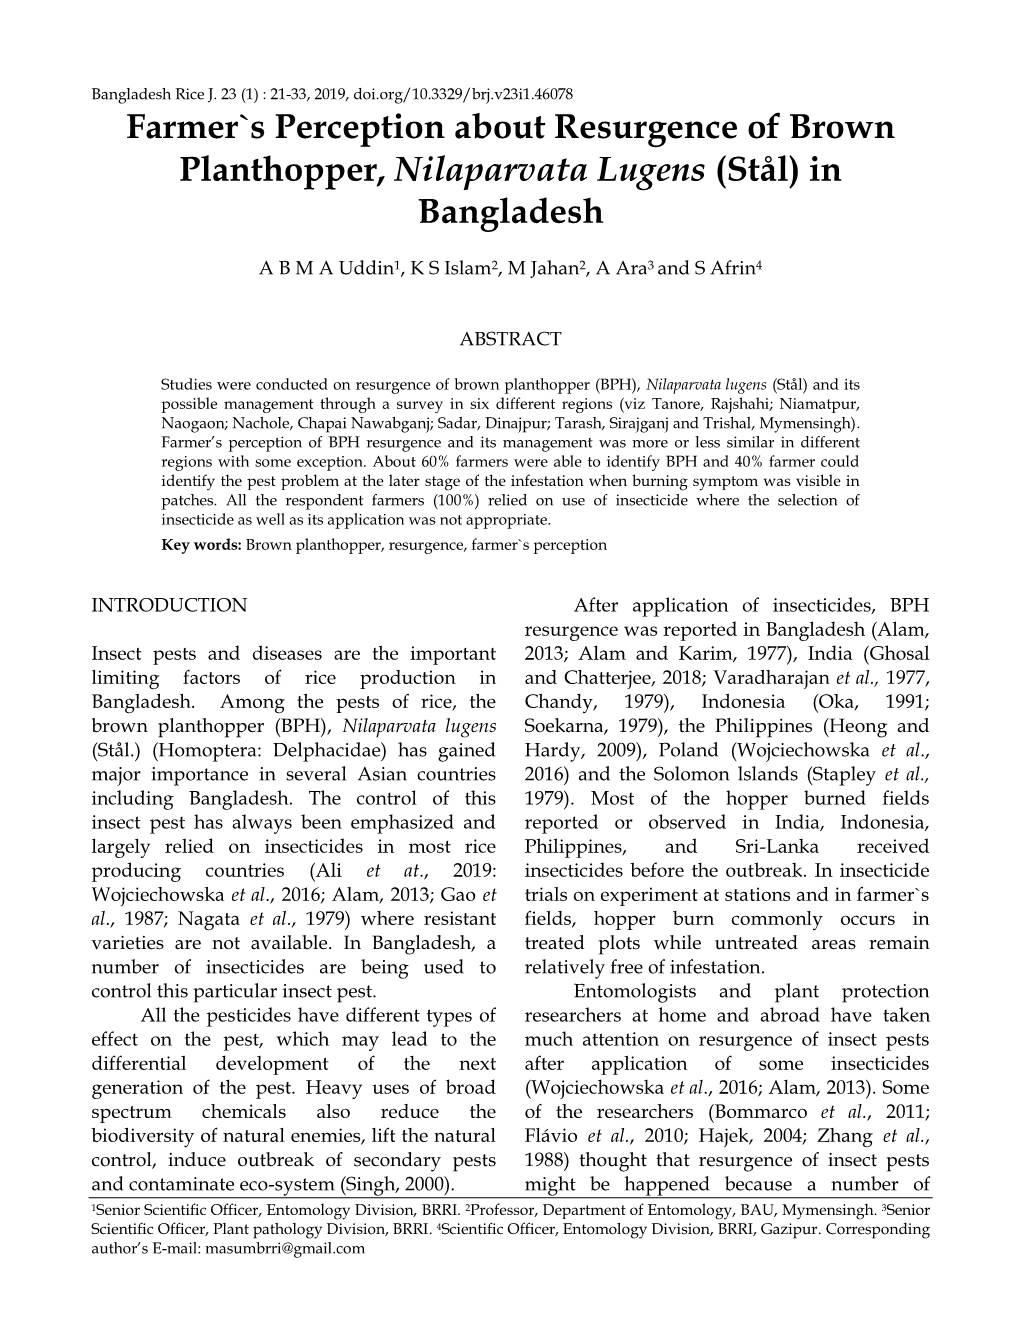 Farmer`S Perception About Resurgence of Brown Planthopper, Nilaparvata Lugens (Stål) in Bangladesh